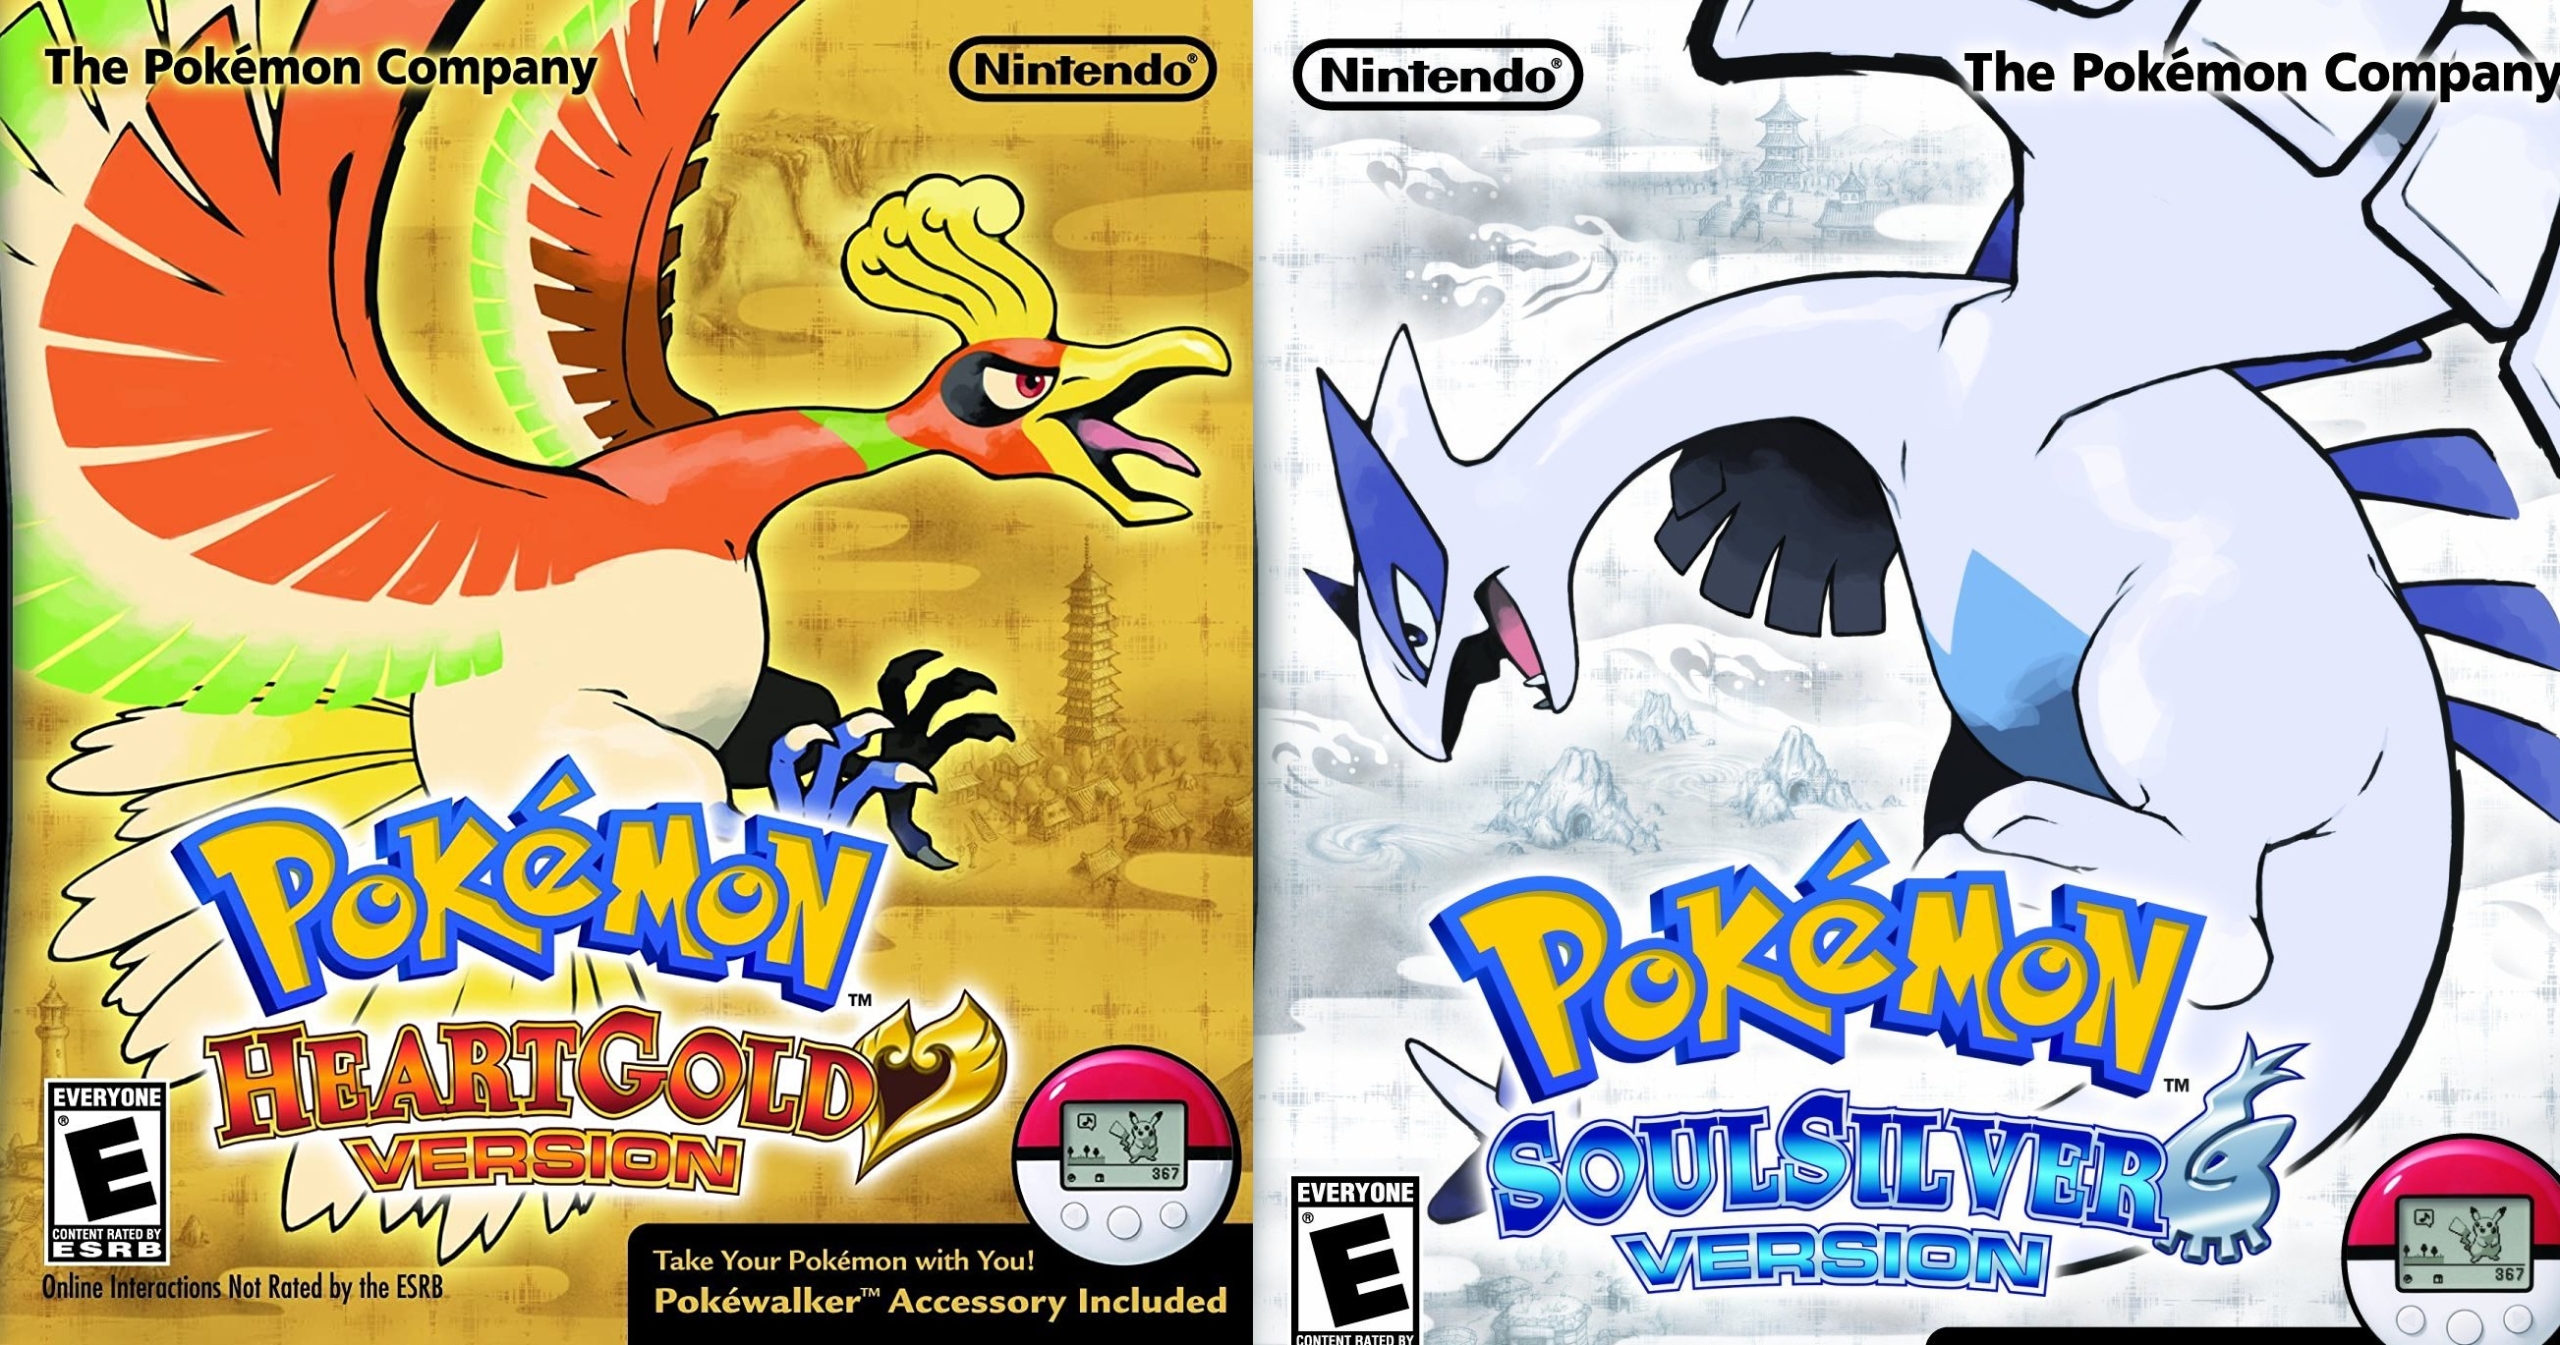 Here Are The 9 Best Pokemon Games Ranked from Worst to Best – G FUEL